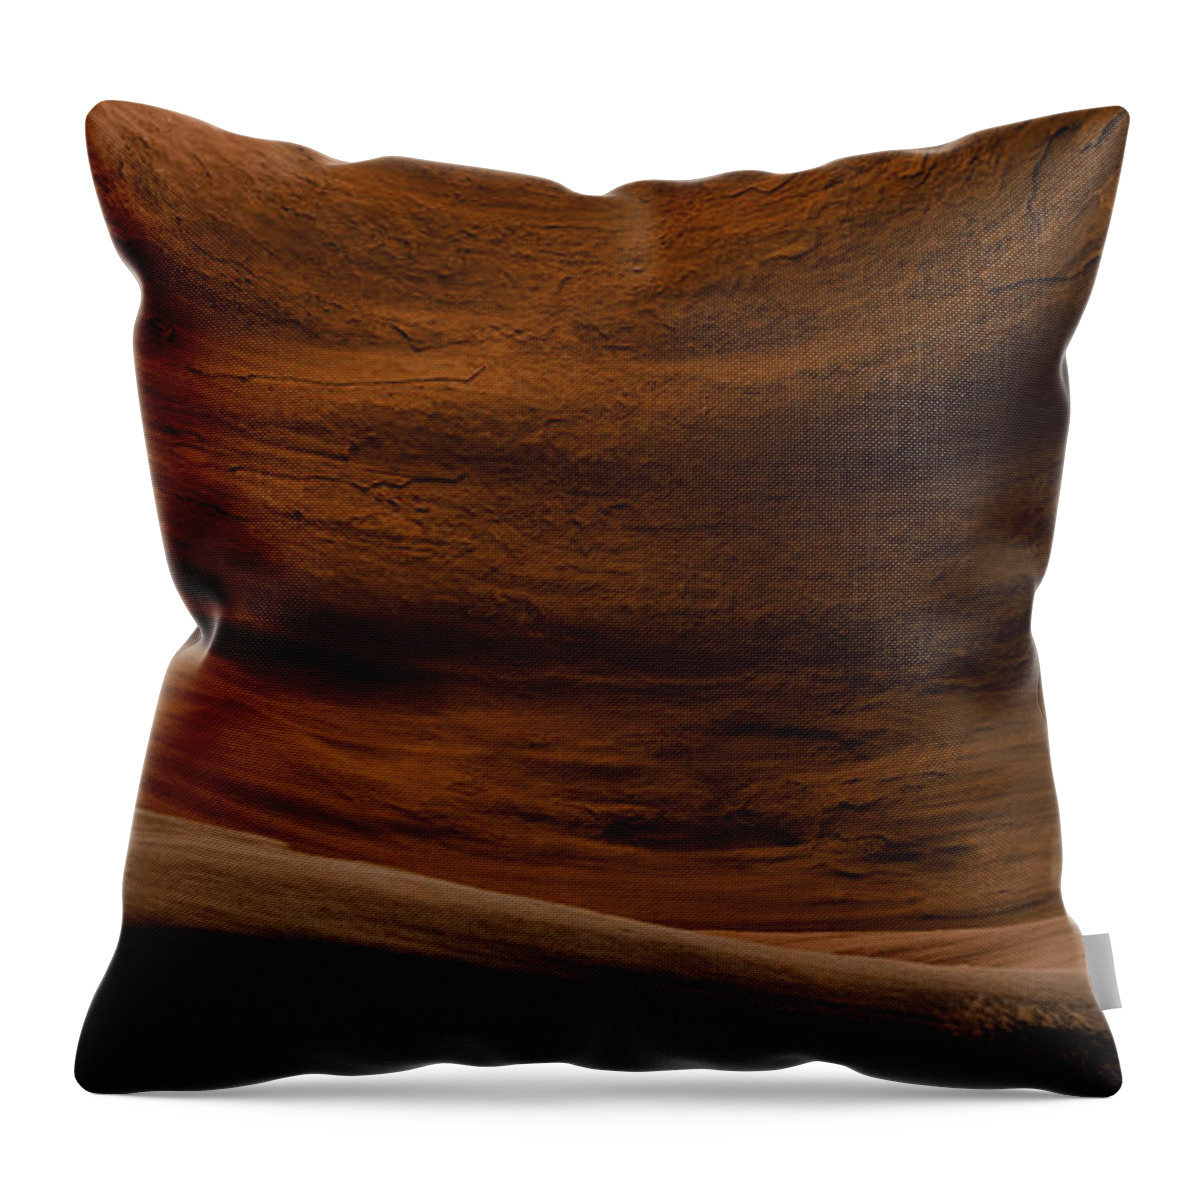 Sandstone Throw Pillow featuring the photograph Sandstone Flow by Chad Dutson